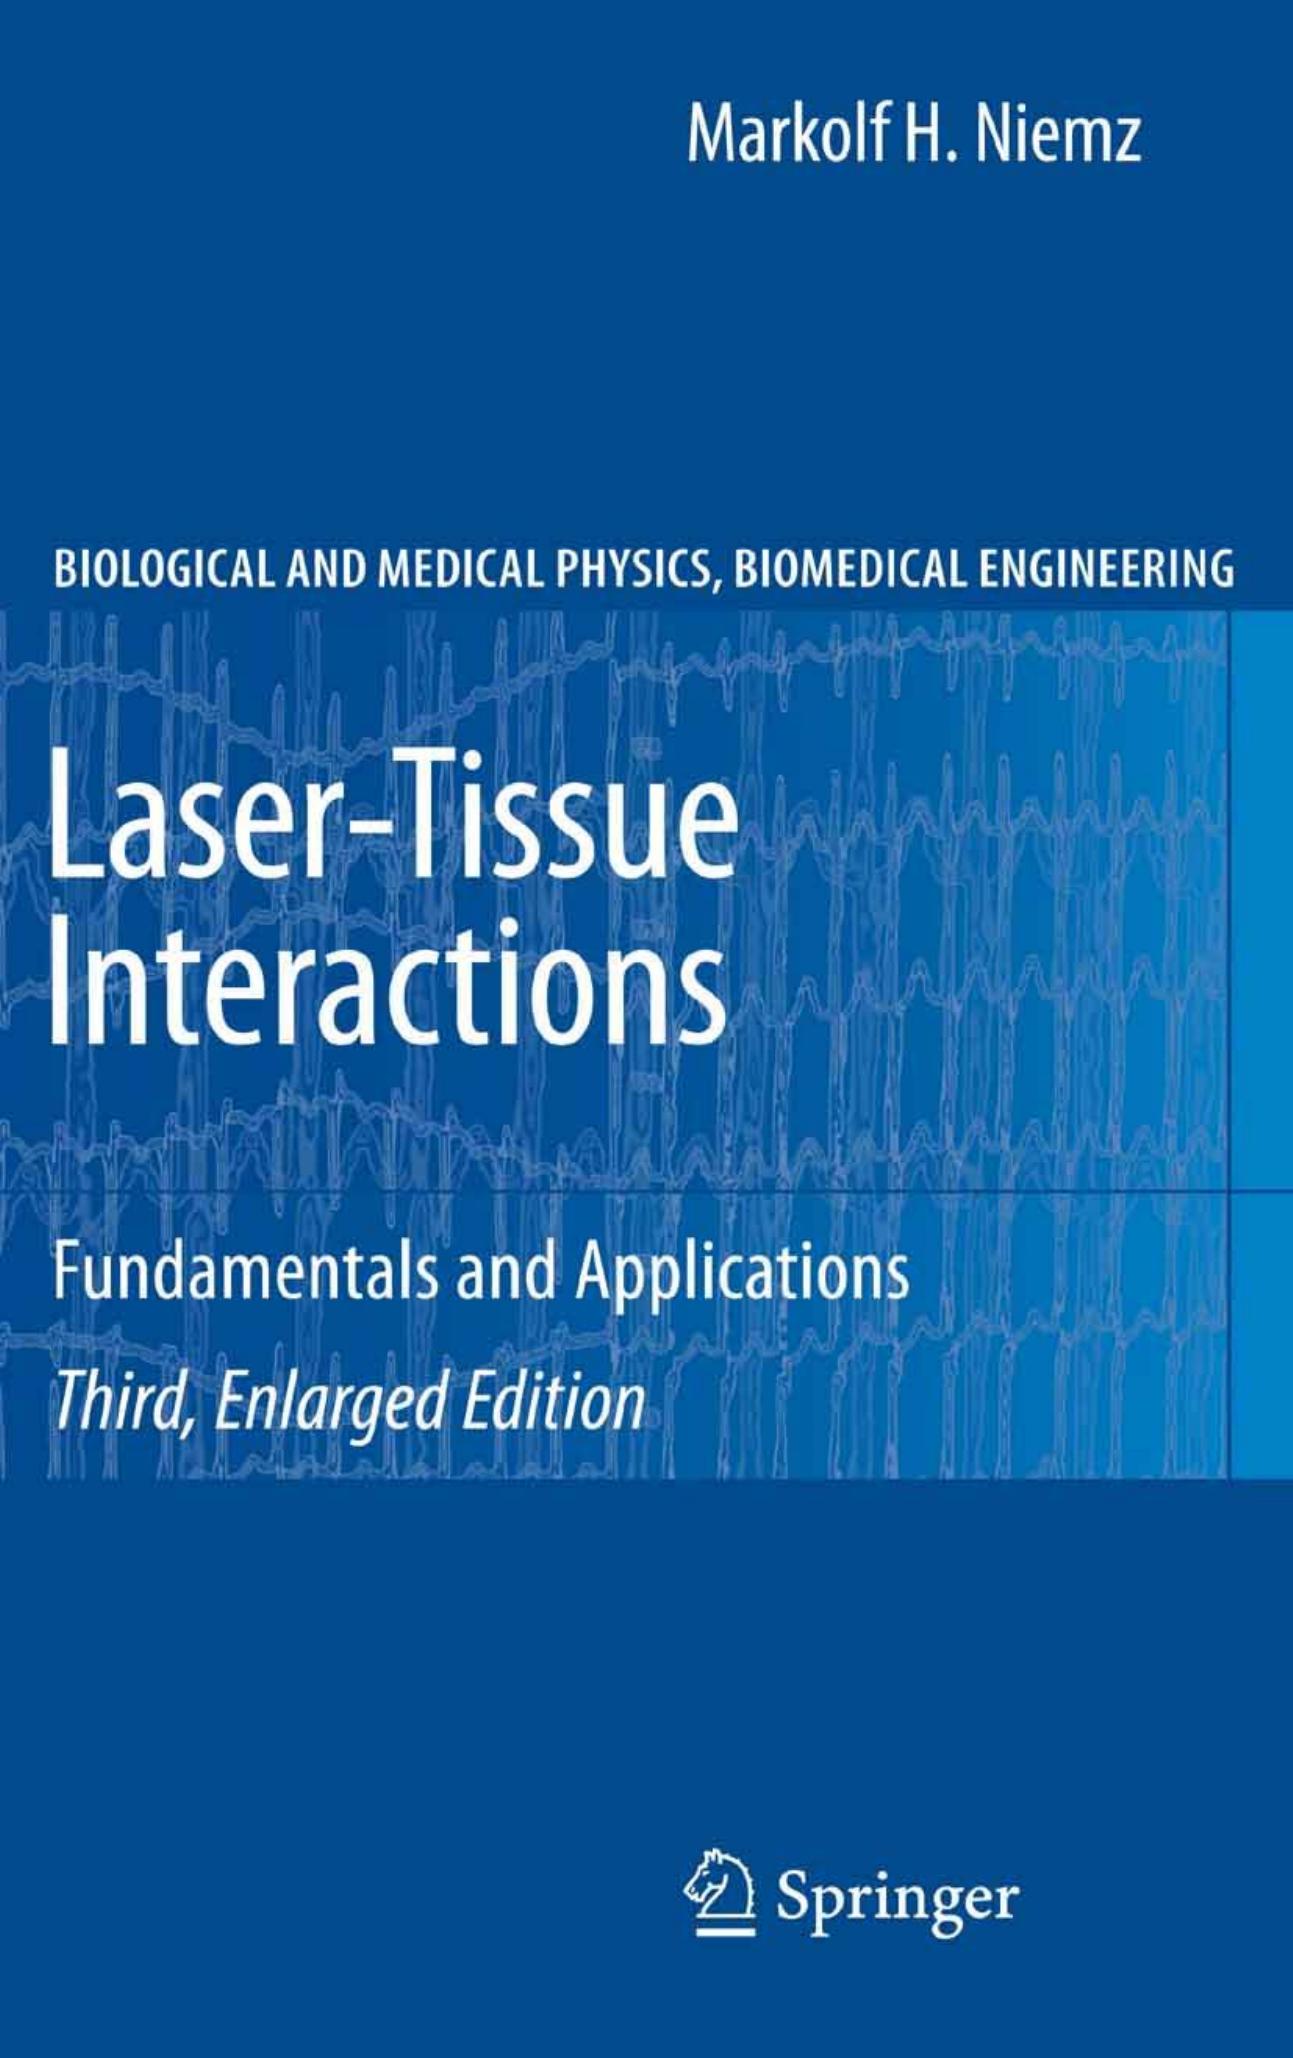 Laser-Tissue Interactions Fundamentals and Applications